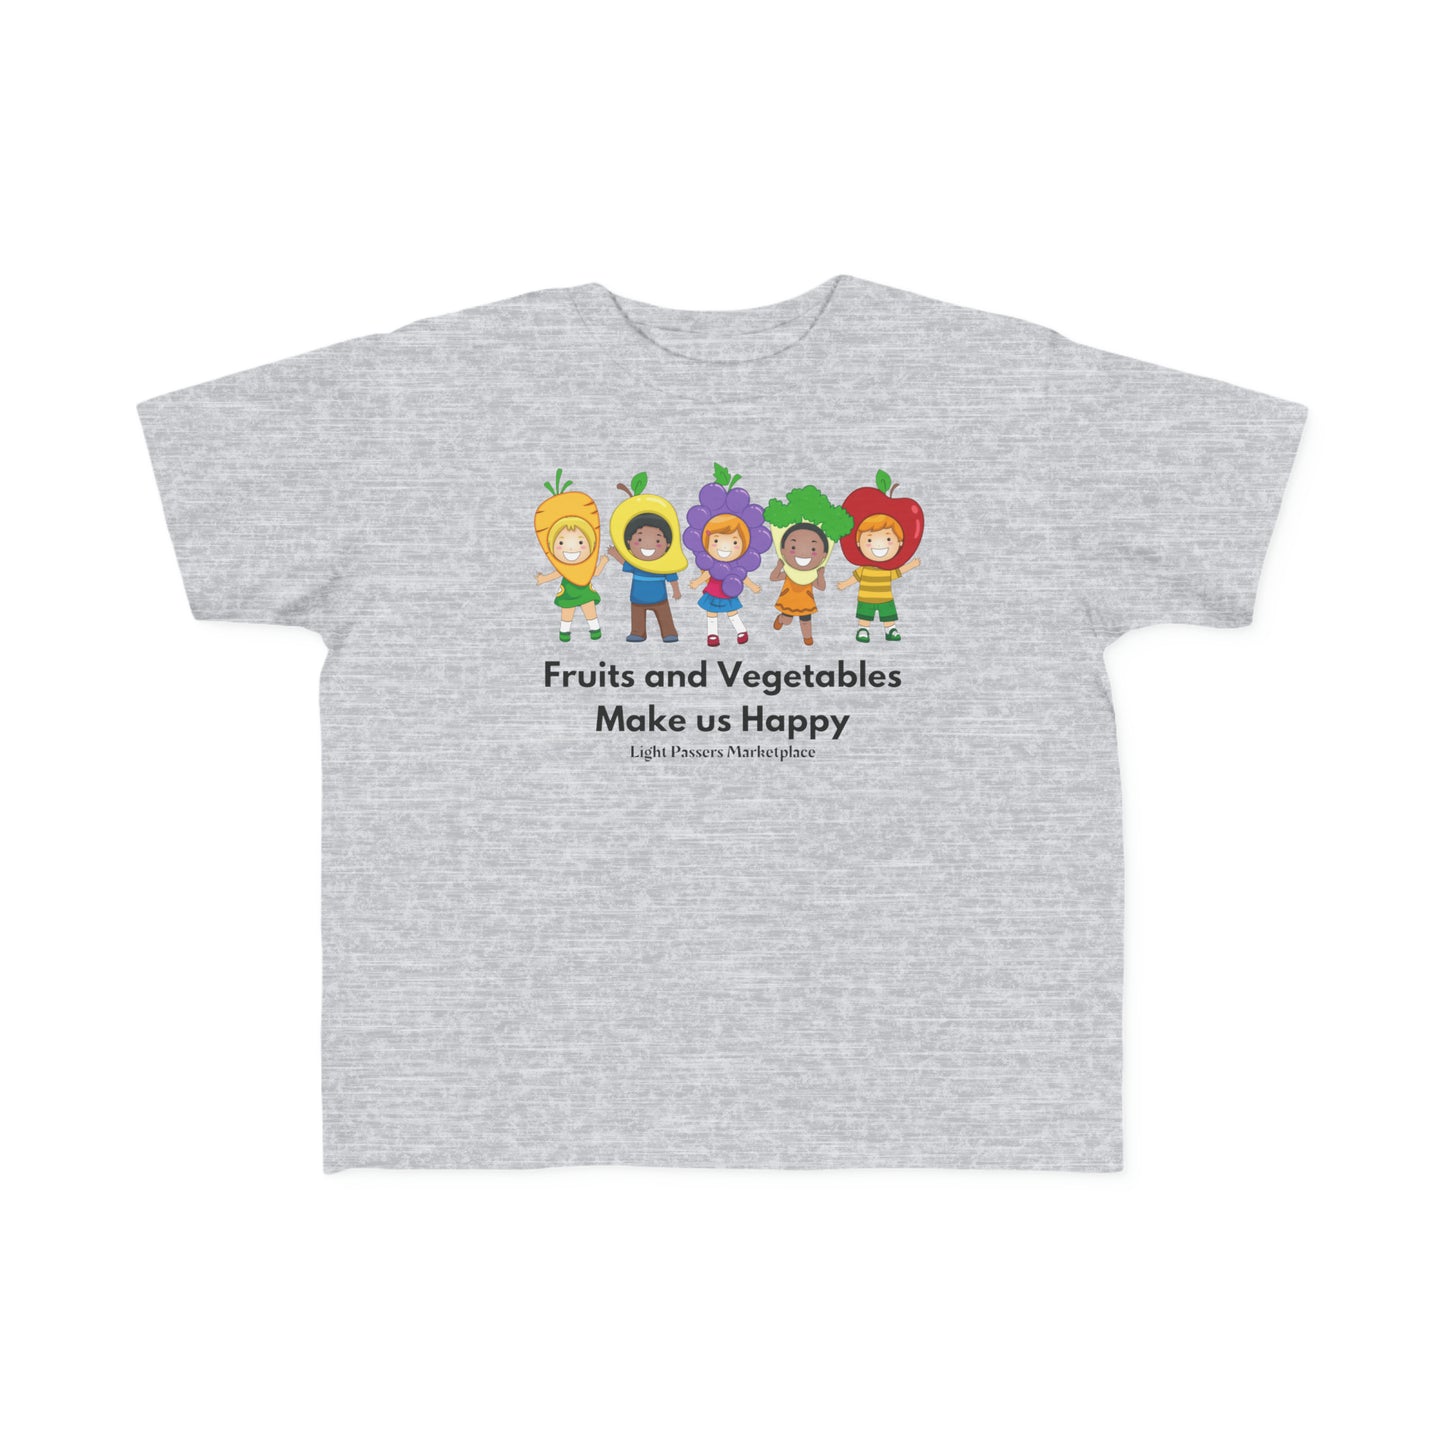 A grey toddler t-shirt featuring cartoon characters like a boy with a yellow object and a girl in a flower garment. Made of soft 100% combed cotton, with durable prints, perfect for sensitive skin.